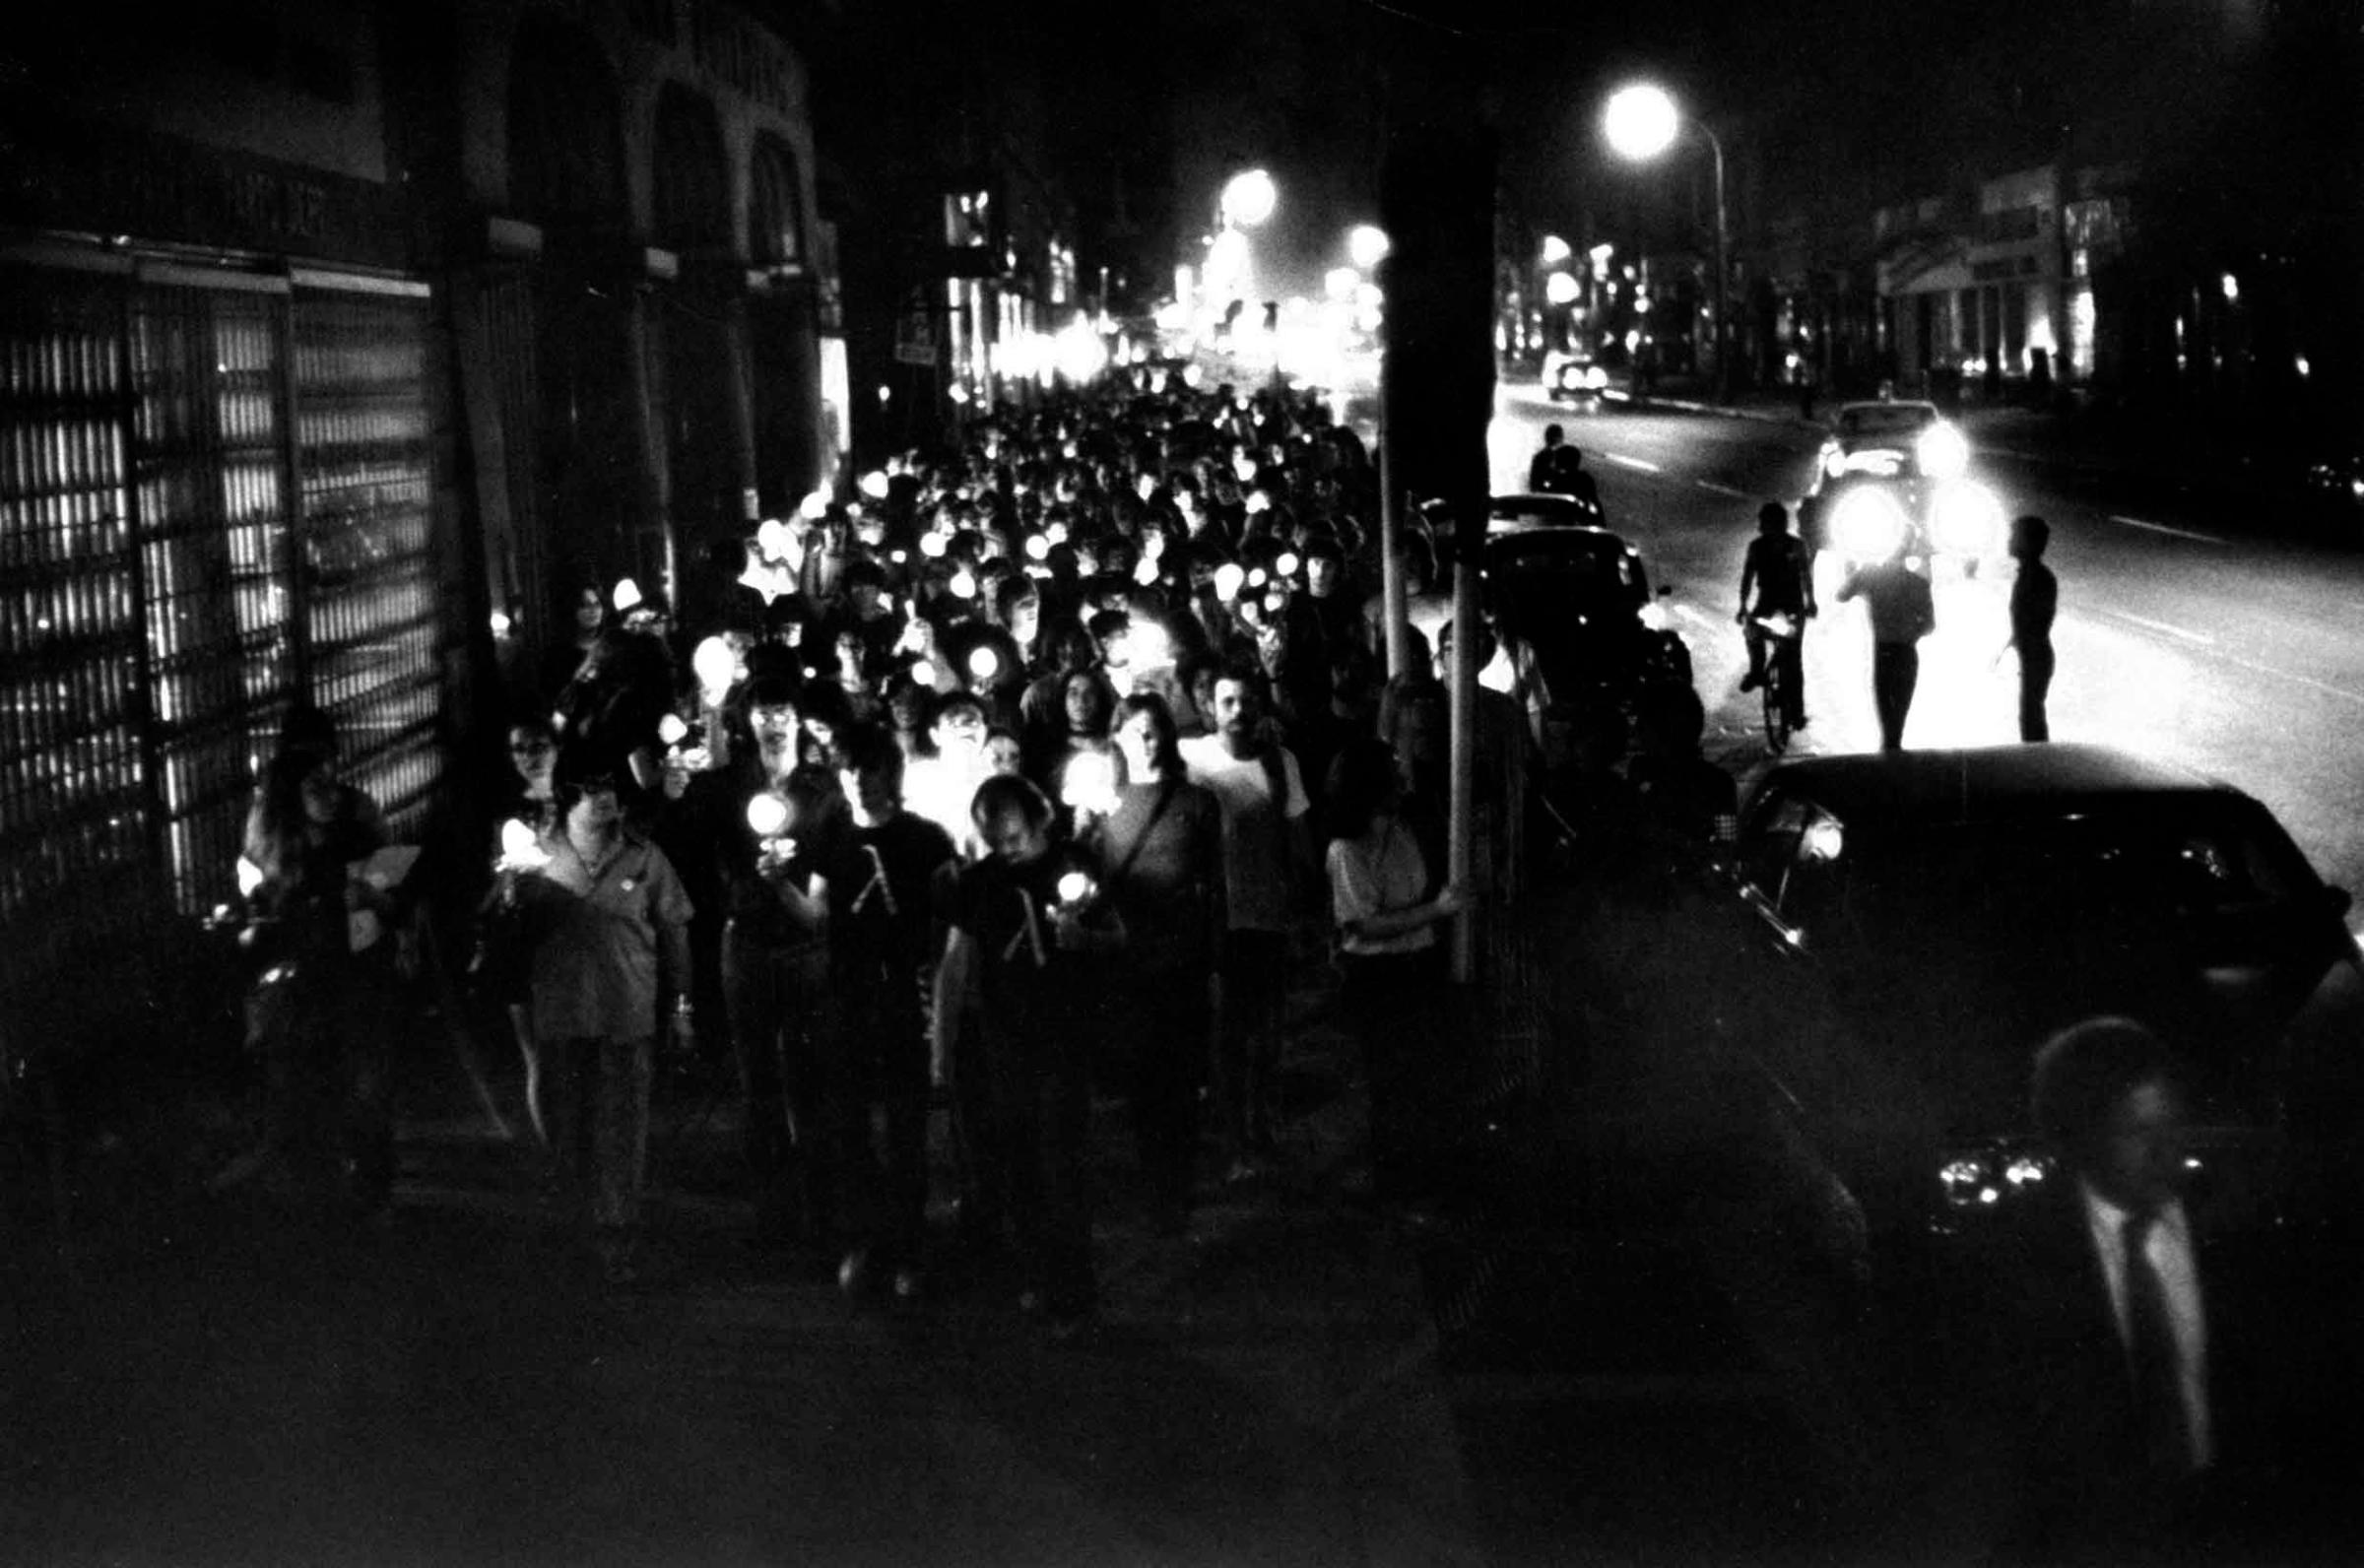 In commemoration of the 1969 Stonewall riots in Greenwich Village, militants this year designated the last week in June as Gay Liberation Week and celebrated with a candlelight parade. The parade involved 300 male and female homosexuals, who marched without incident two miles from Gay Activists headquarters to a park near City Hall.